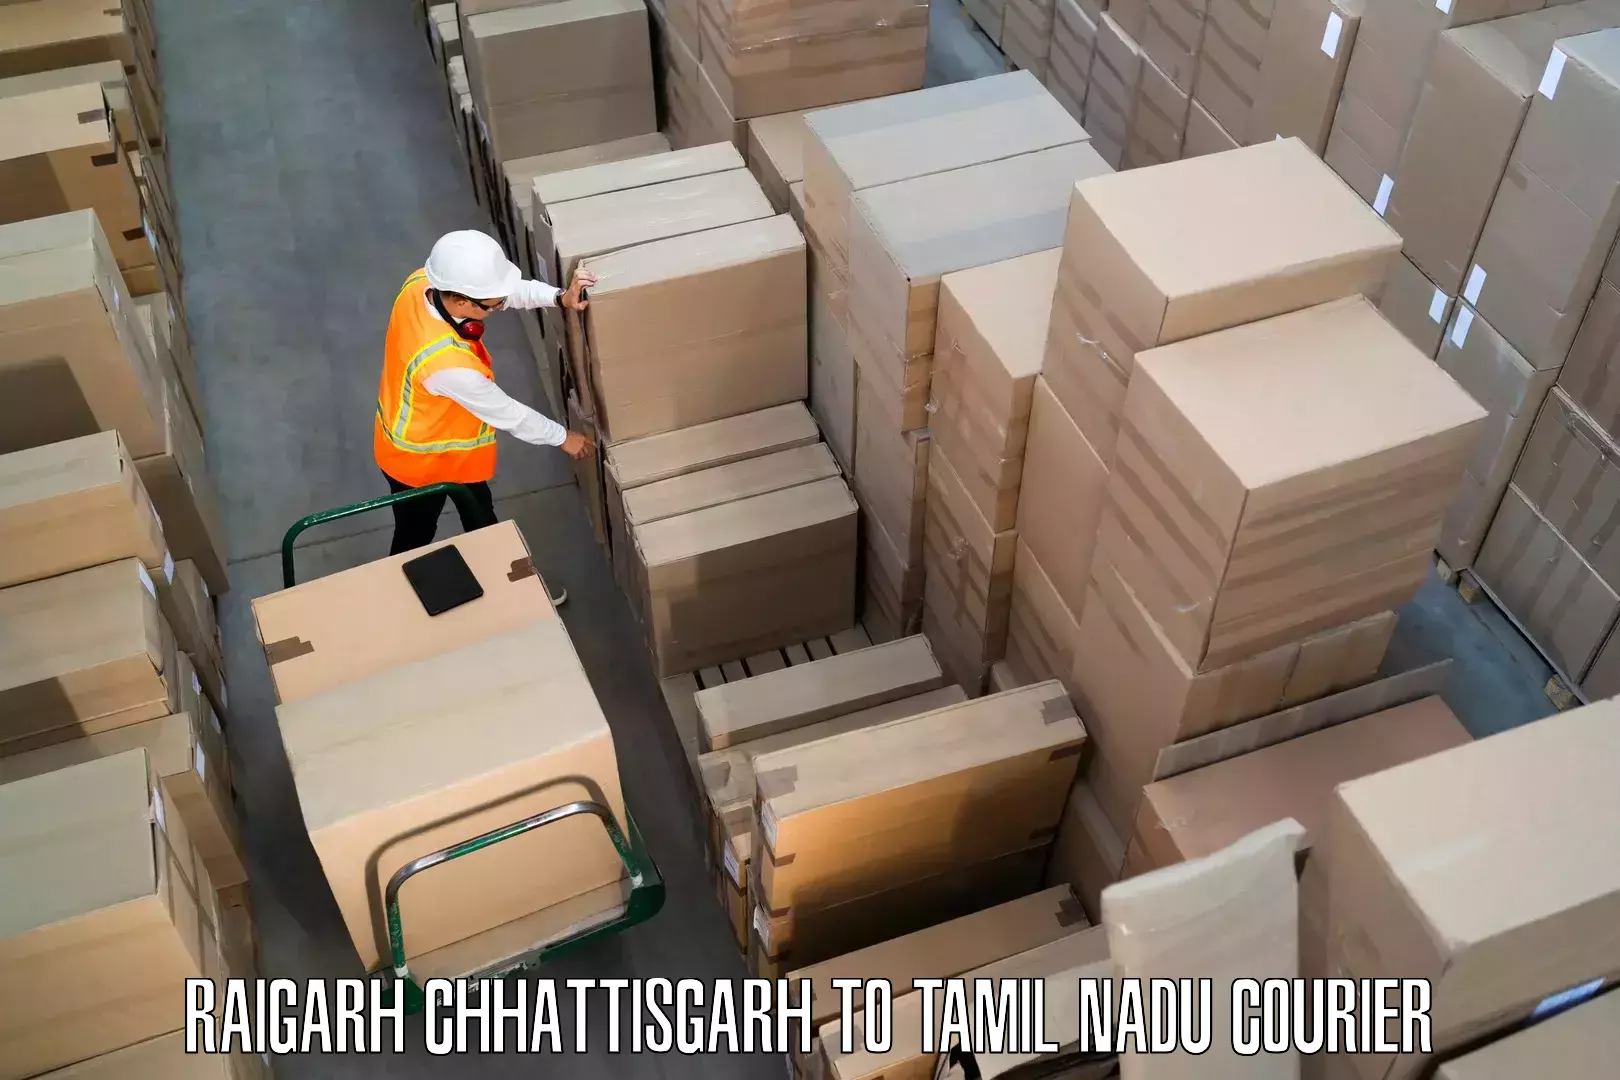 Efficient furniture movers Raigarh Chhattisgarh to Nagercoil